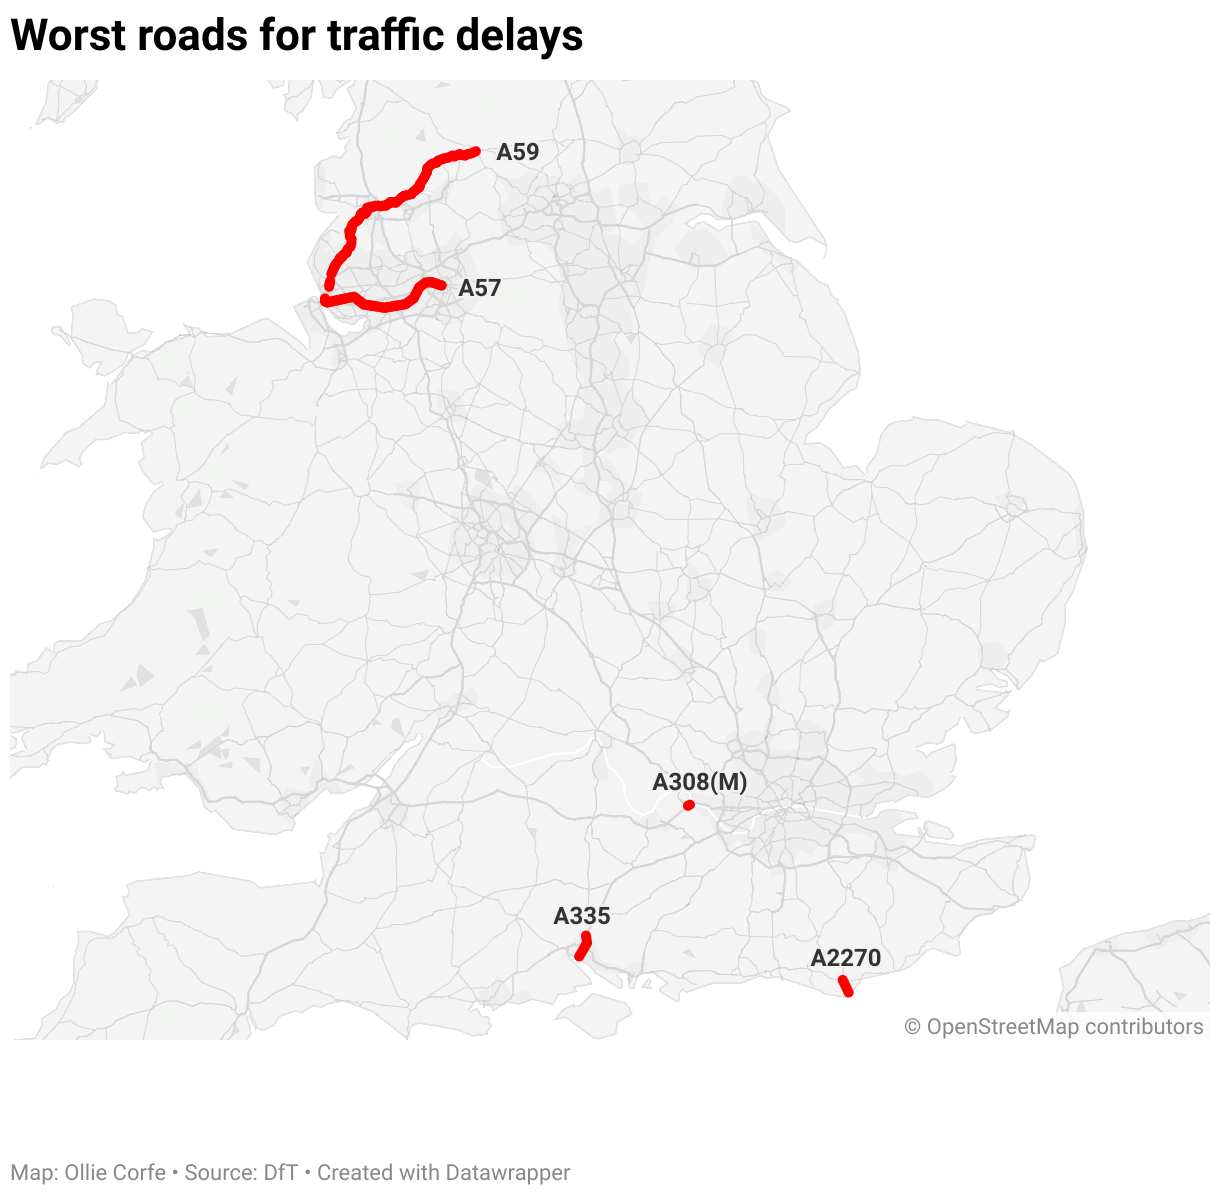 Map of most delayed roads in England.